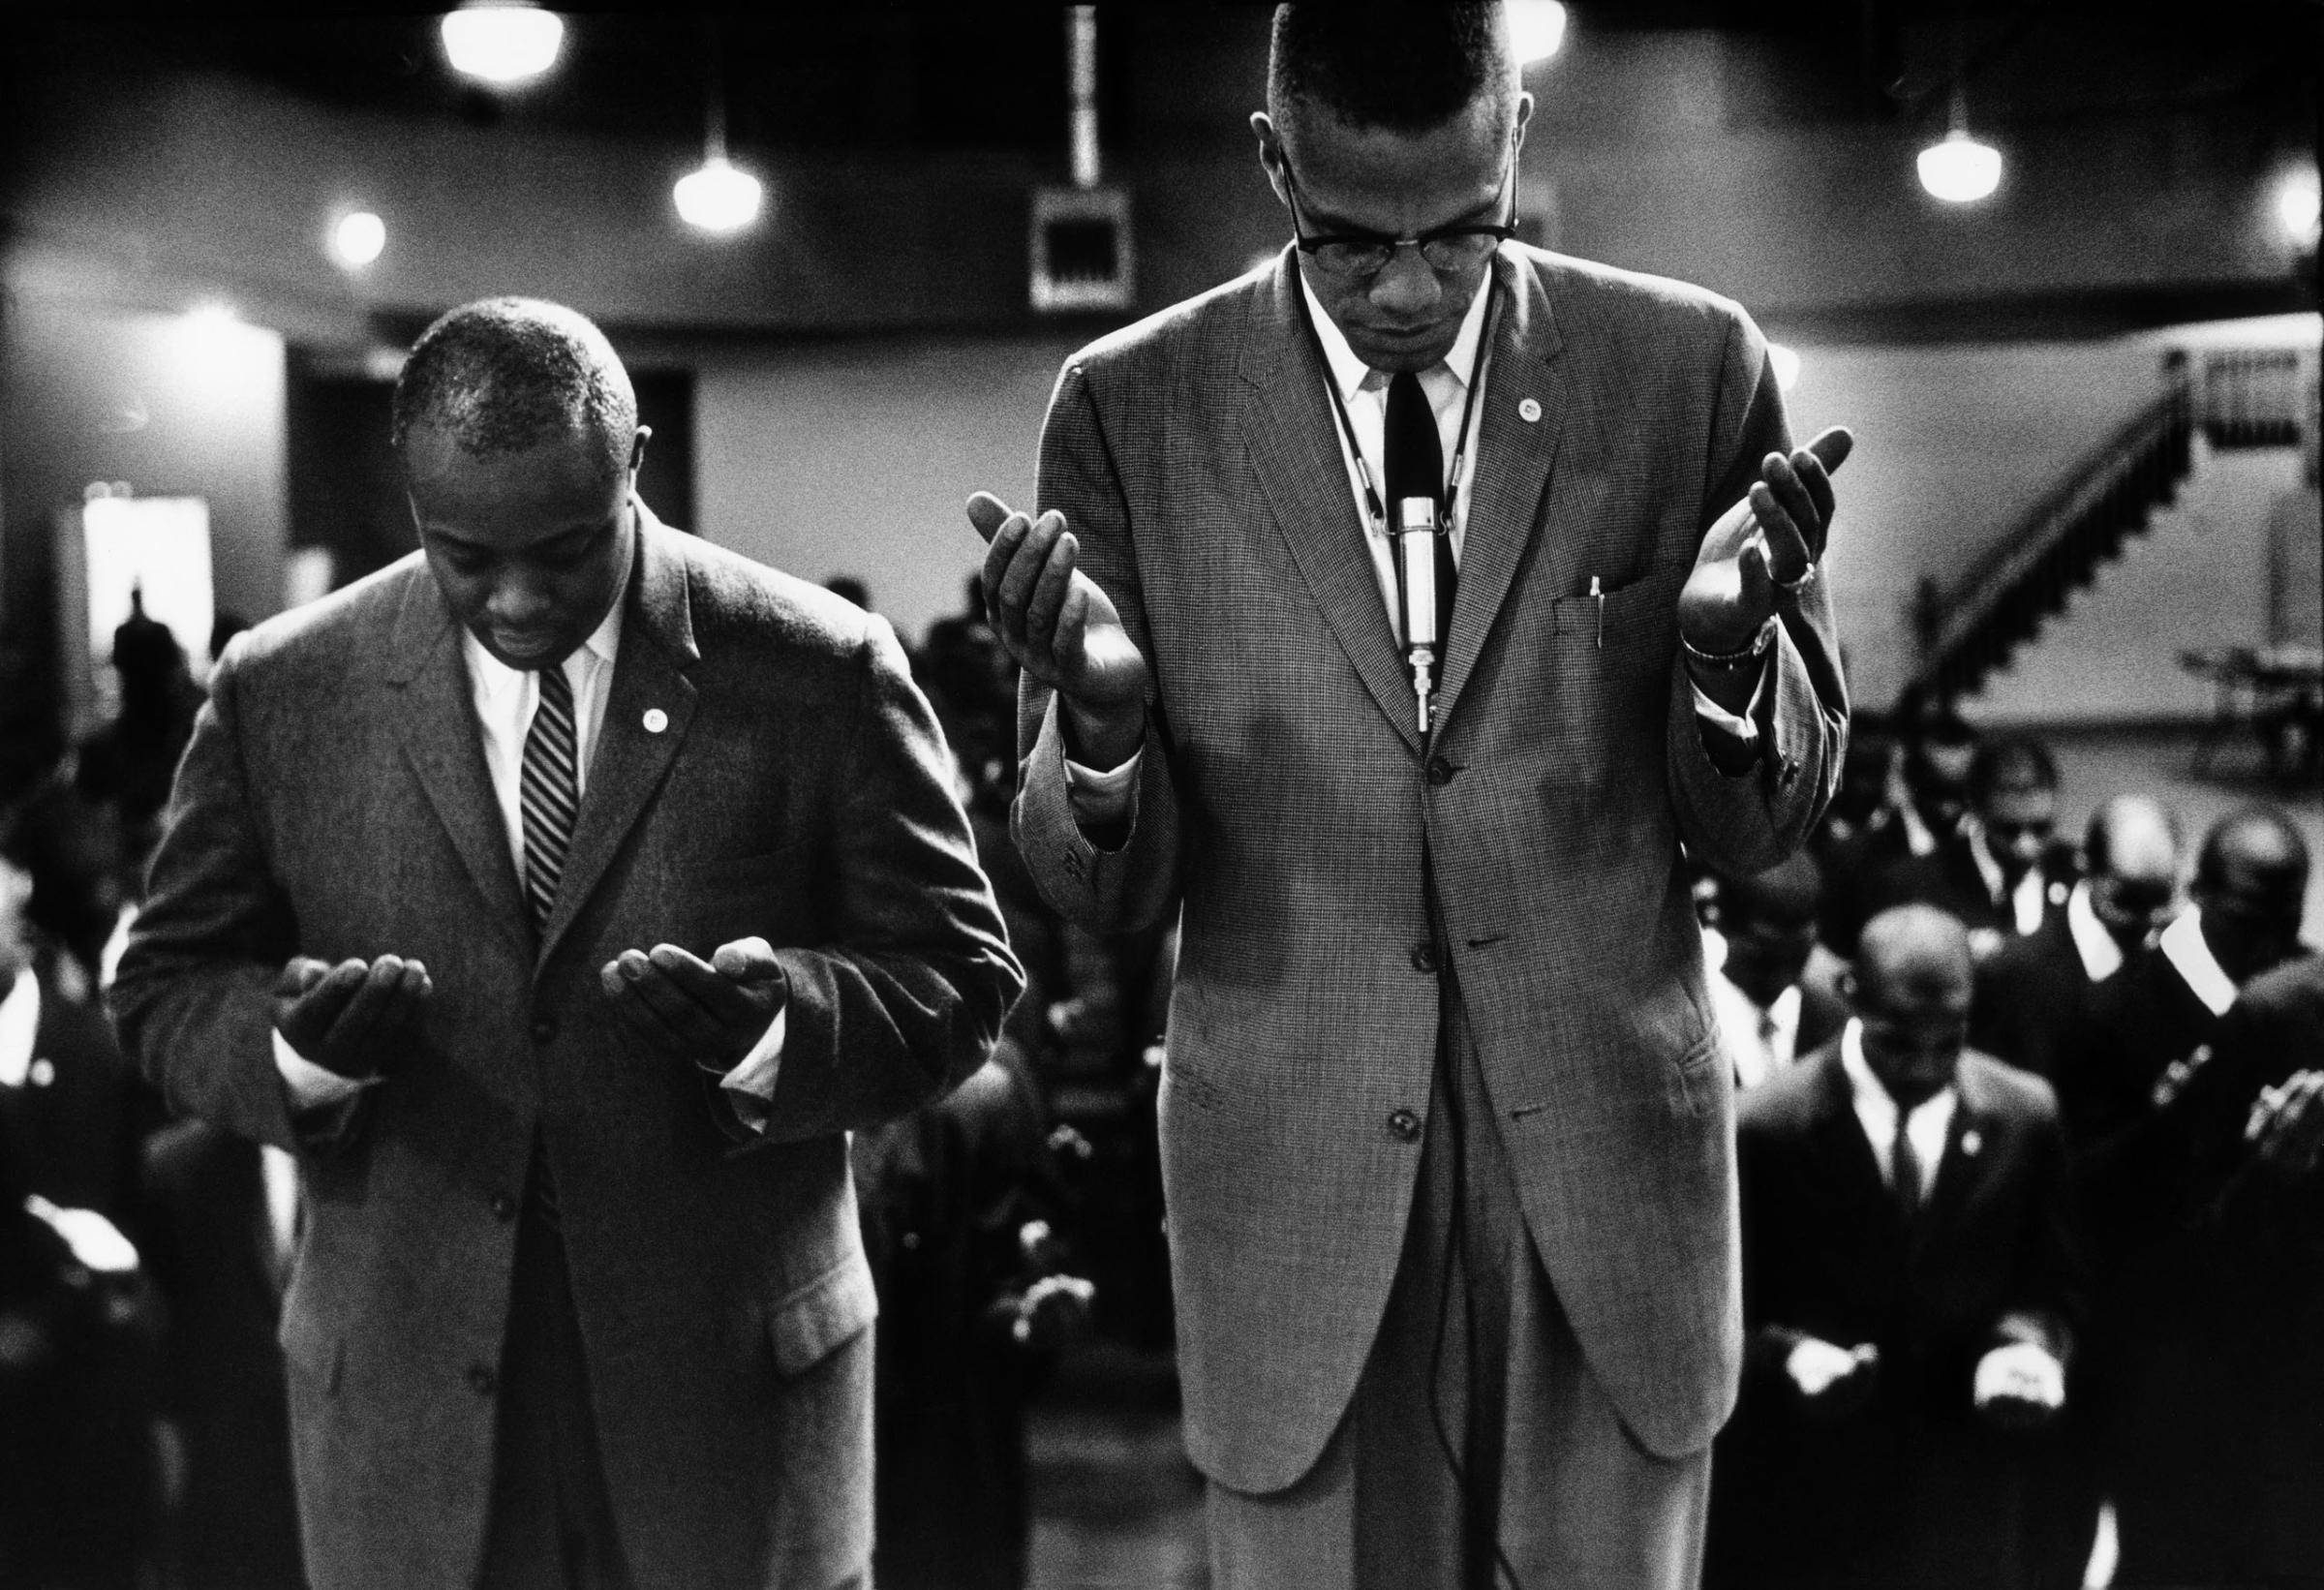 Malcolm X Leads Muslims in Prayer, Chicago, 1963, from Black Muslims.